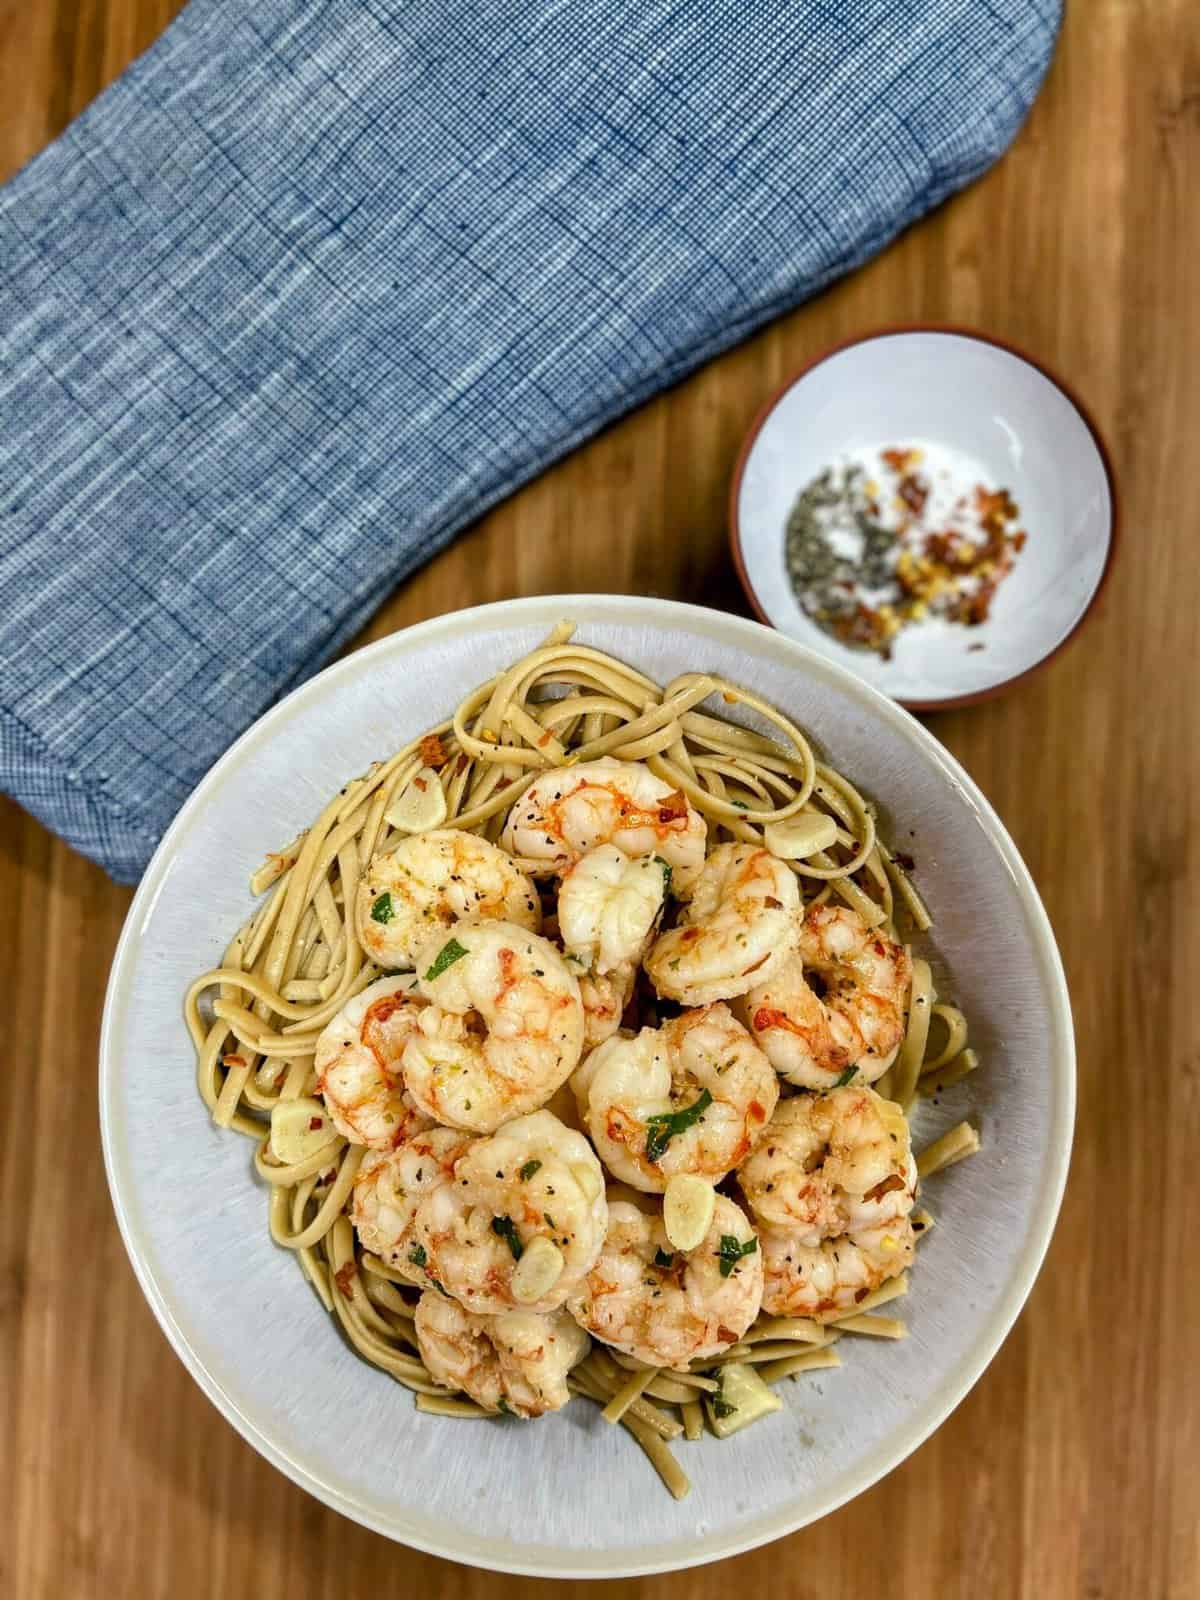 PowerXL Smokeless Grill (Review) and Skinny Grilled Shrimp Scampi Skewers  with Weight Watchers Points